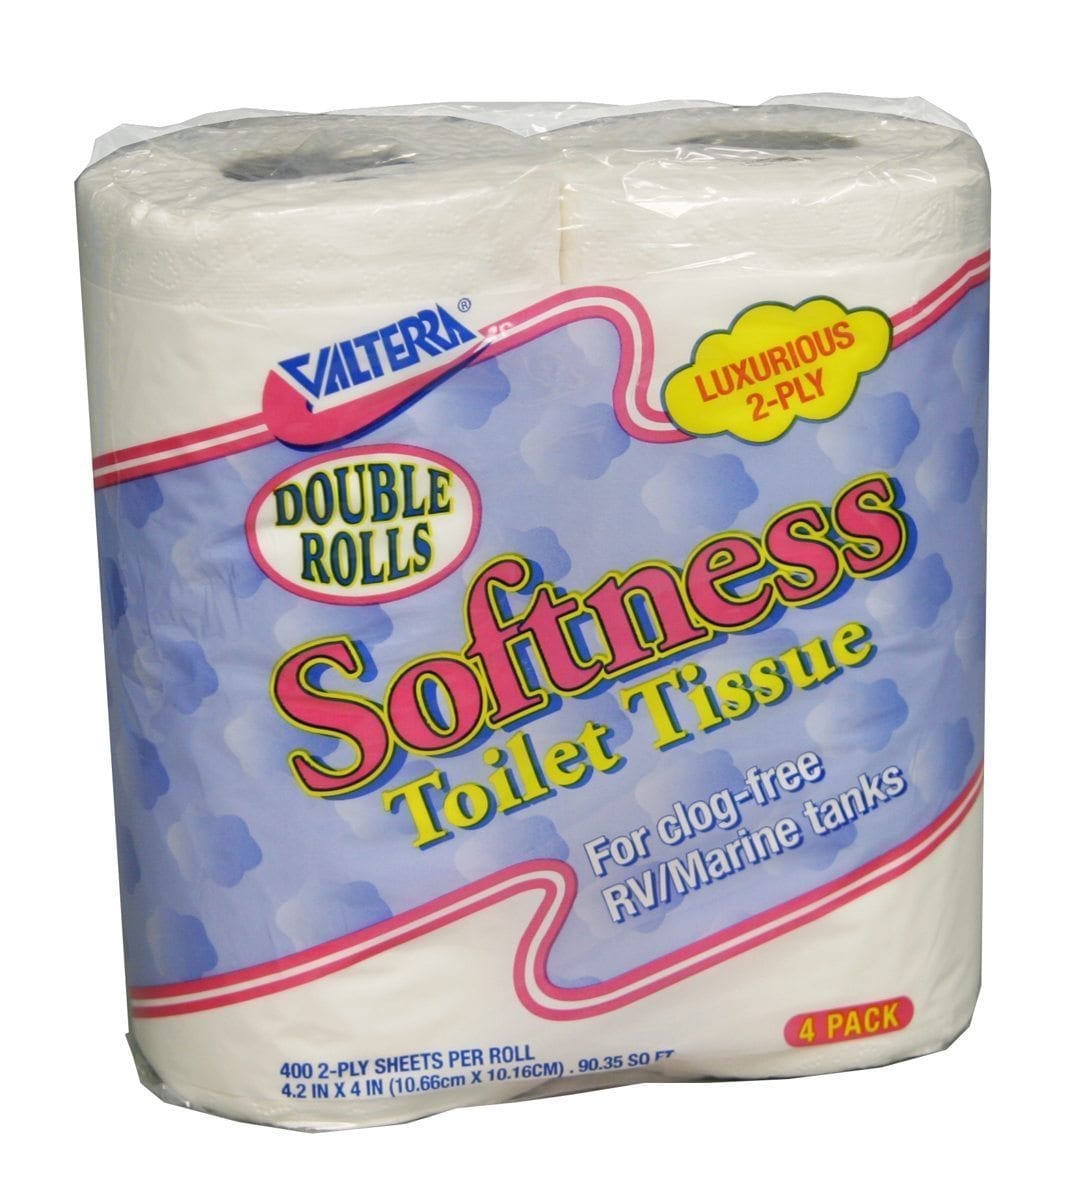 Valterra Q23638 Softness 2-Ply Toilet Tissue - Double Roll, Pack of 4